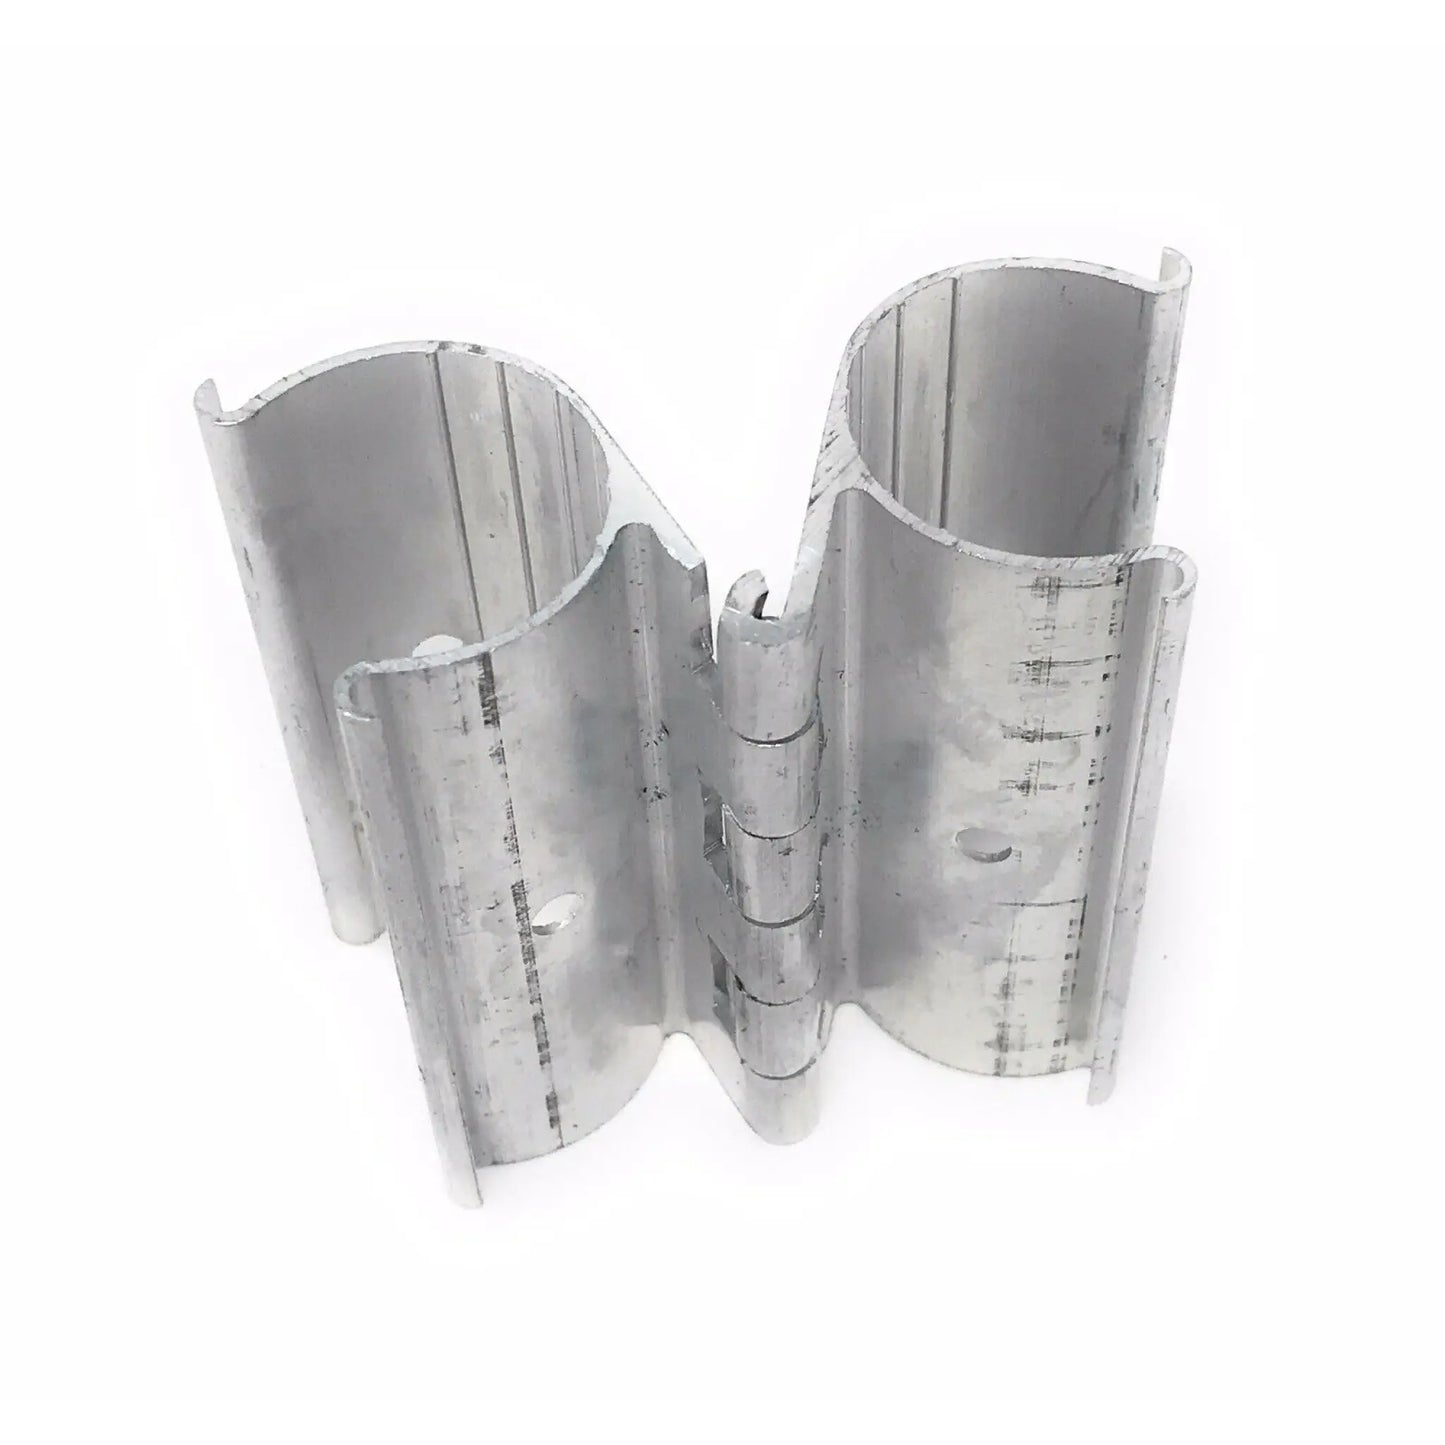 Aluminum Snap on Hinges for PVC pipes - 1